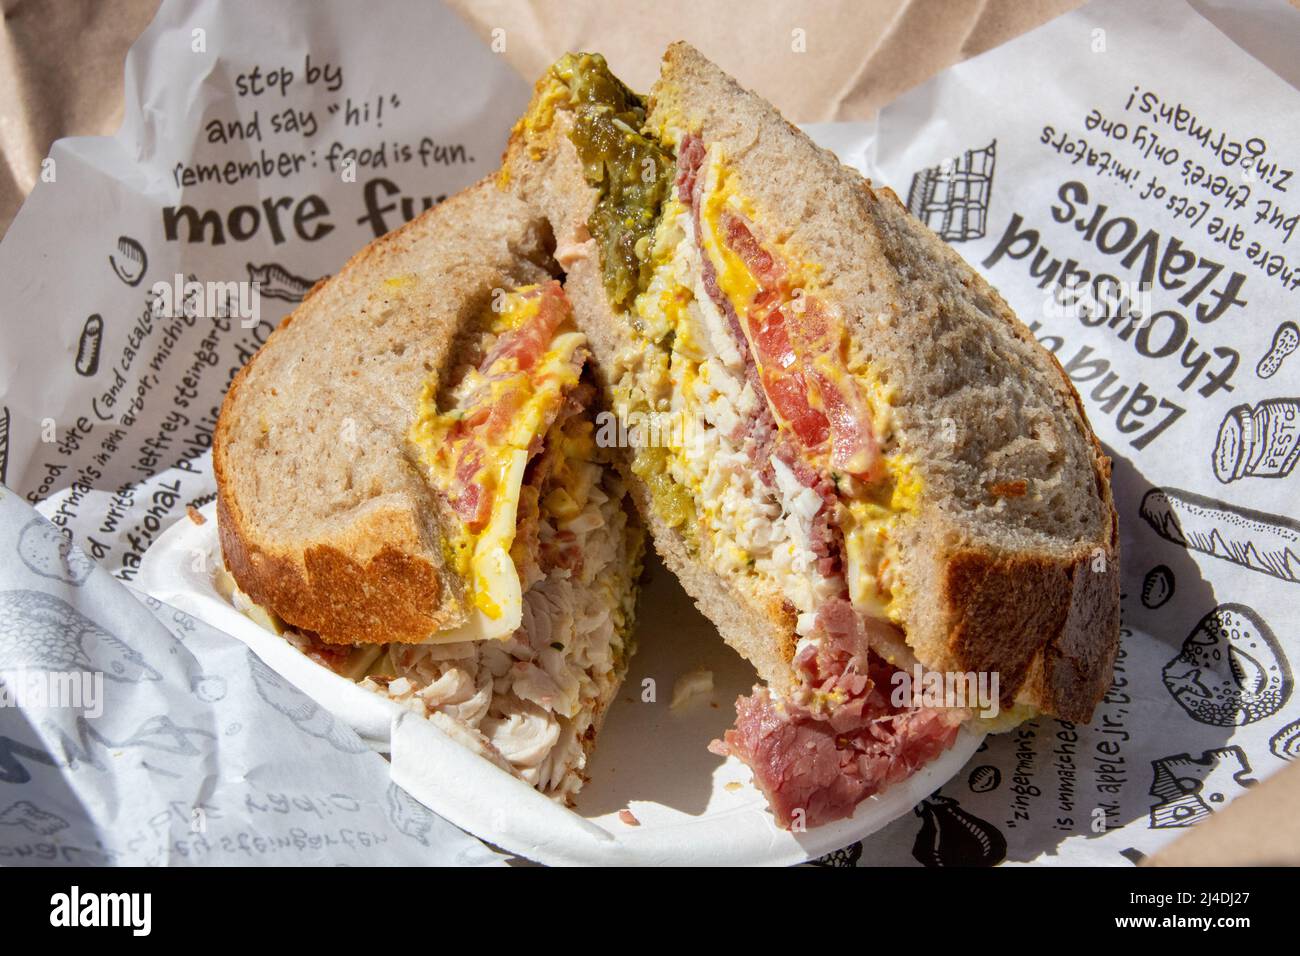 #79 Sparky Get Your Zing On, corned beef and turkey on Rye, Zingerman's Delicatessen, Ann Arbor, MI, USA Stock Photo